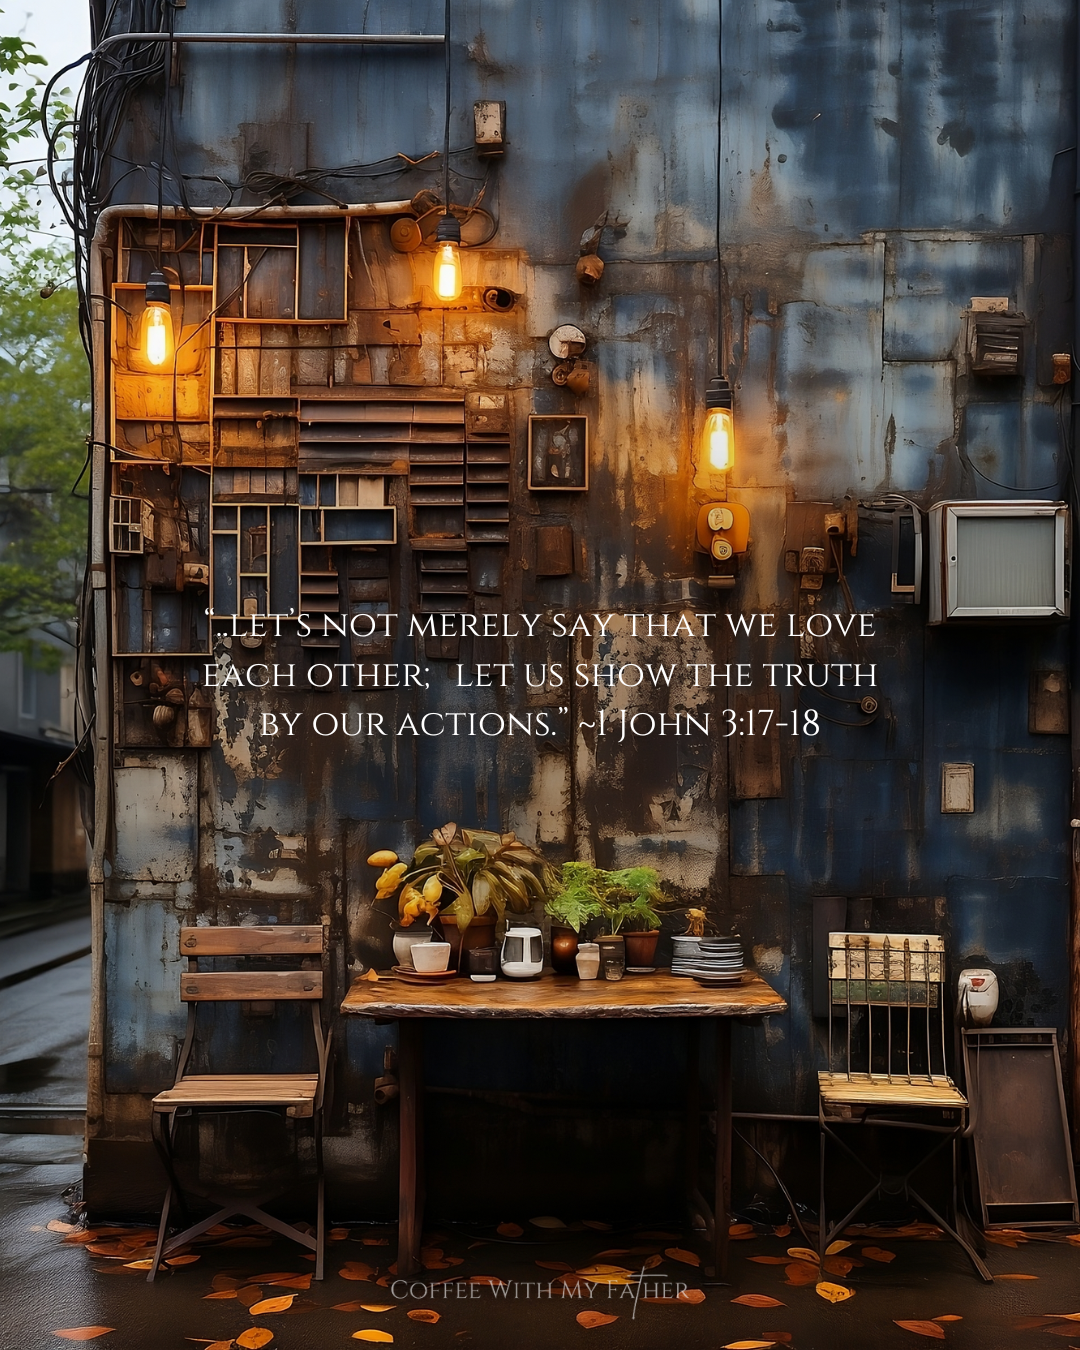 Rustic urban setting with warm hanging lights and a simple wooden table set against a backdrop of textured metal walls, accompanied by a Bible verse from 1 John 3:17-18 on loving through actions.